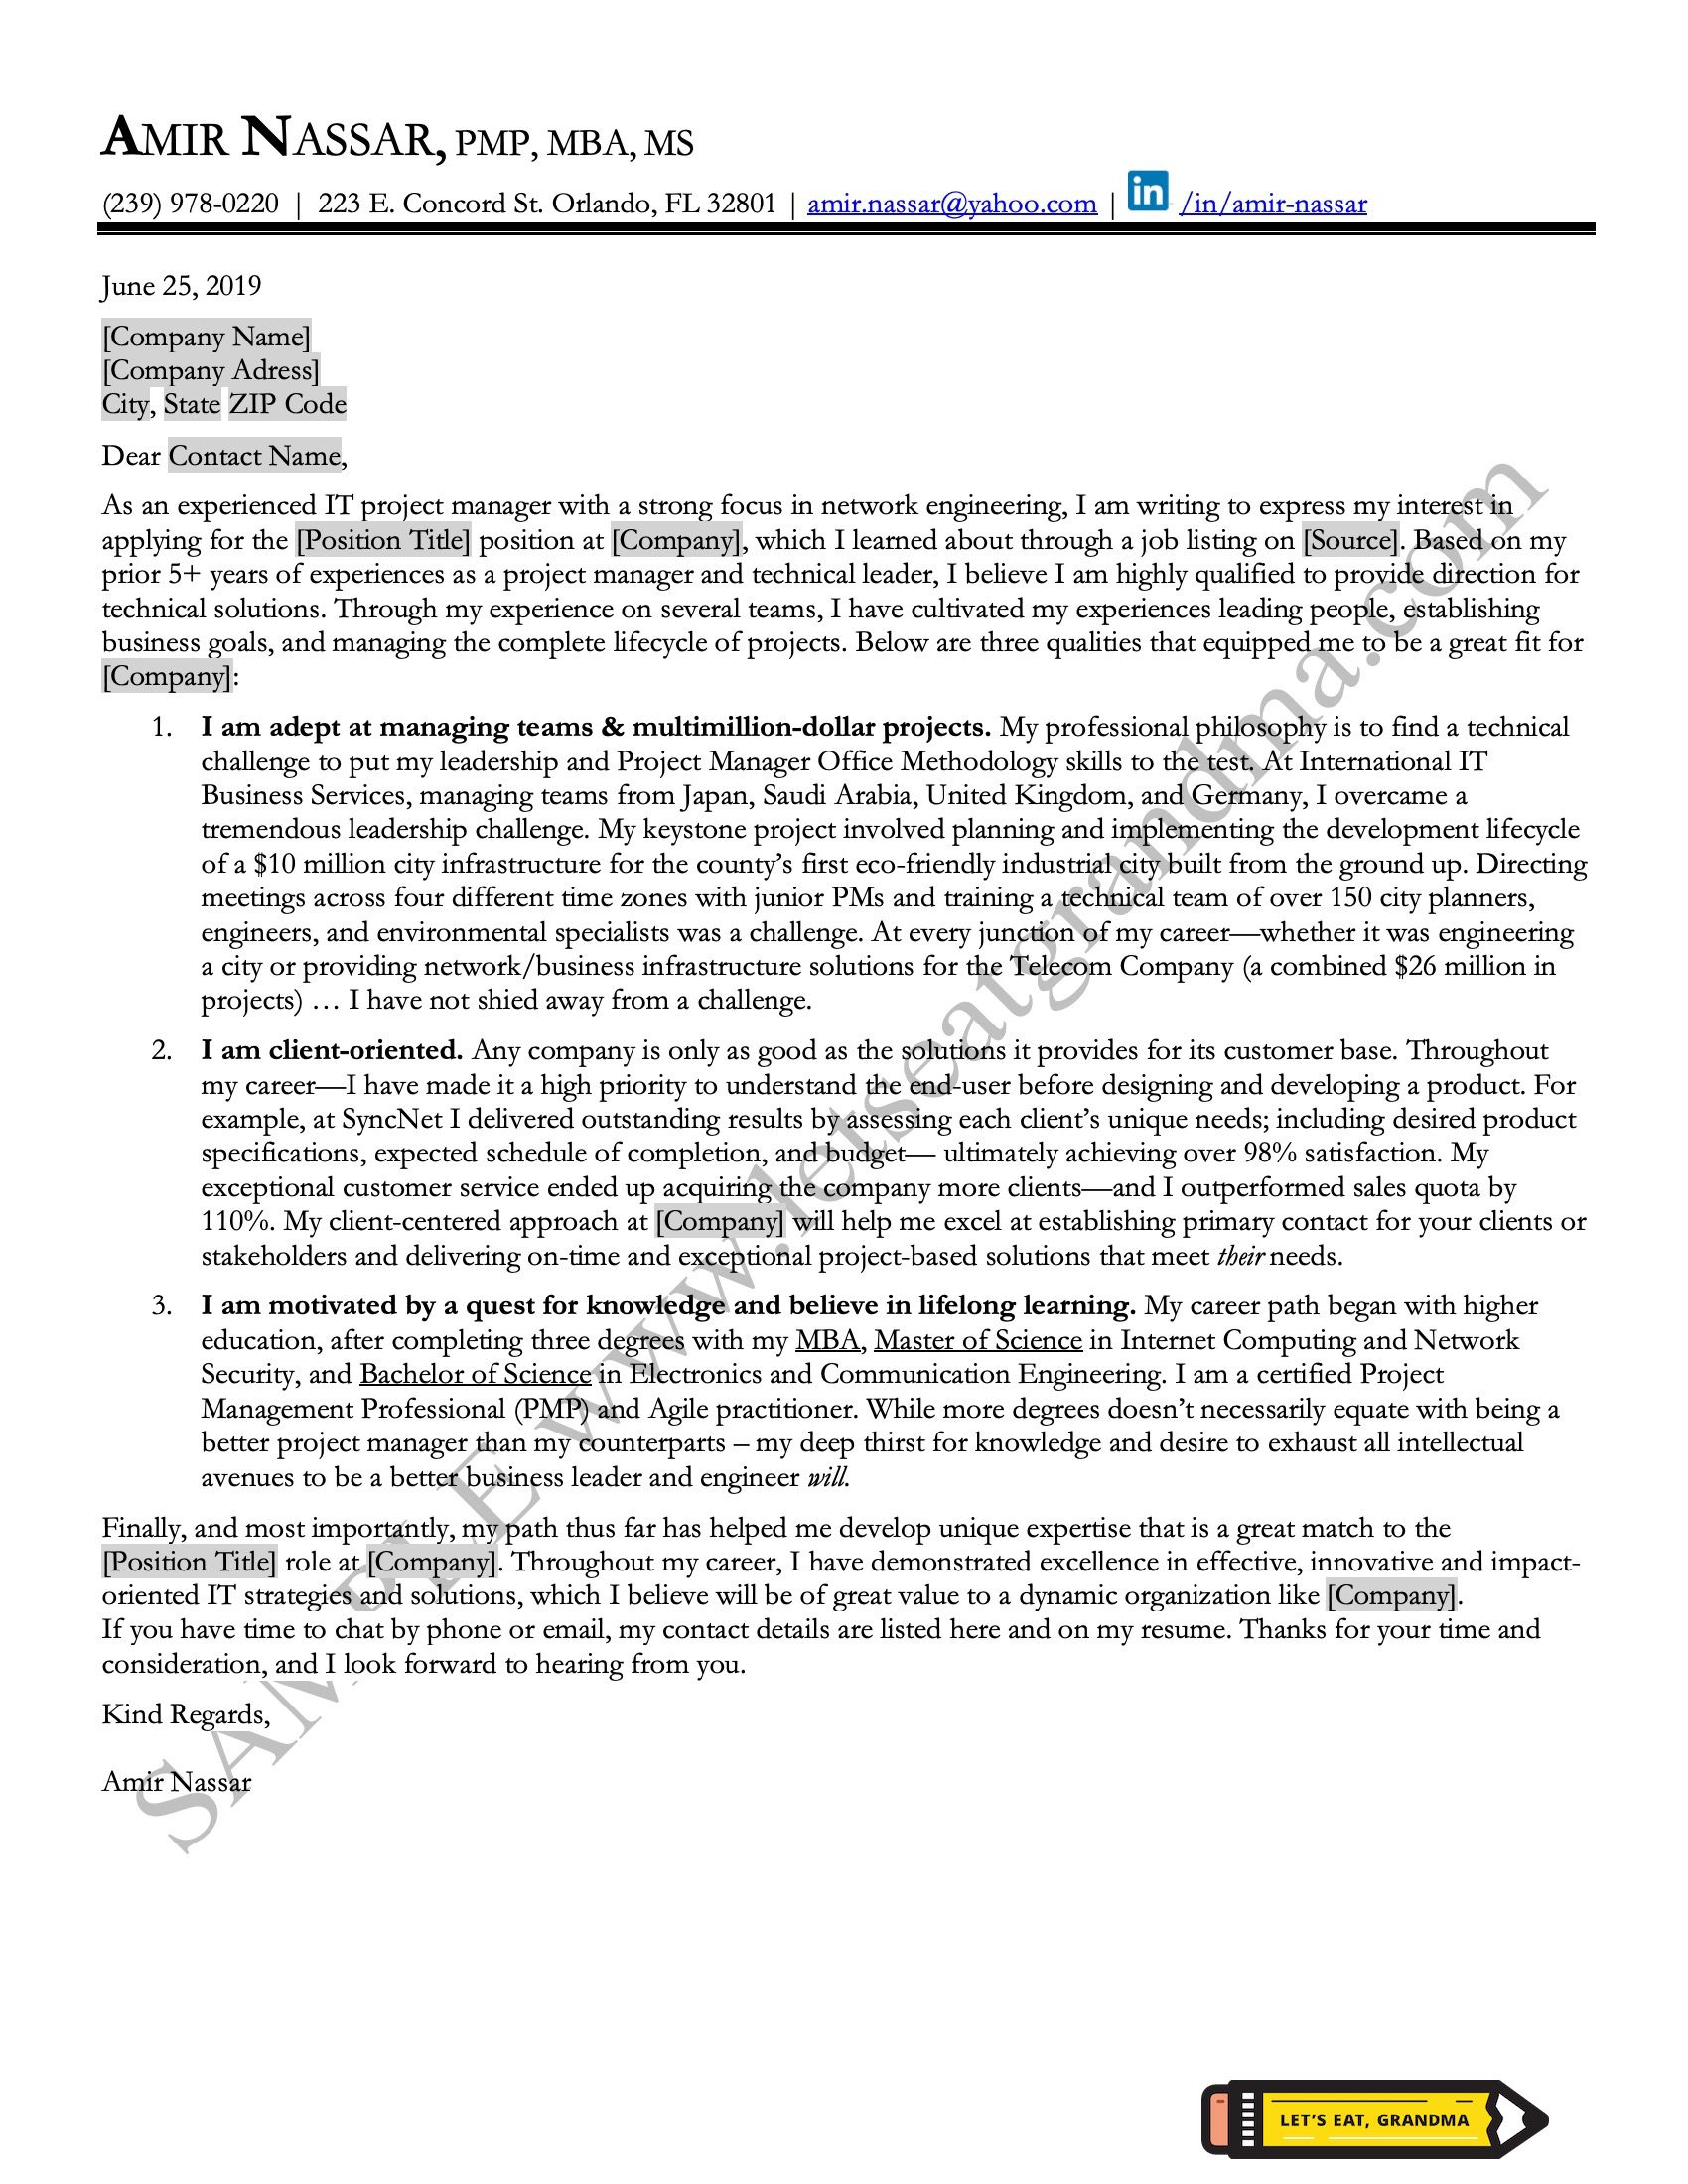 Project Manager Cover Letter Sample with Guide | Let's Eat ...